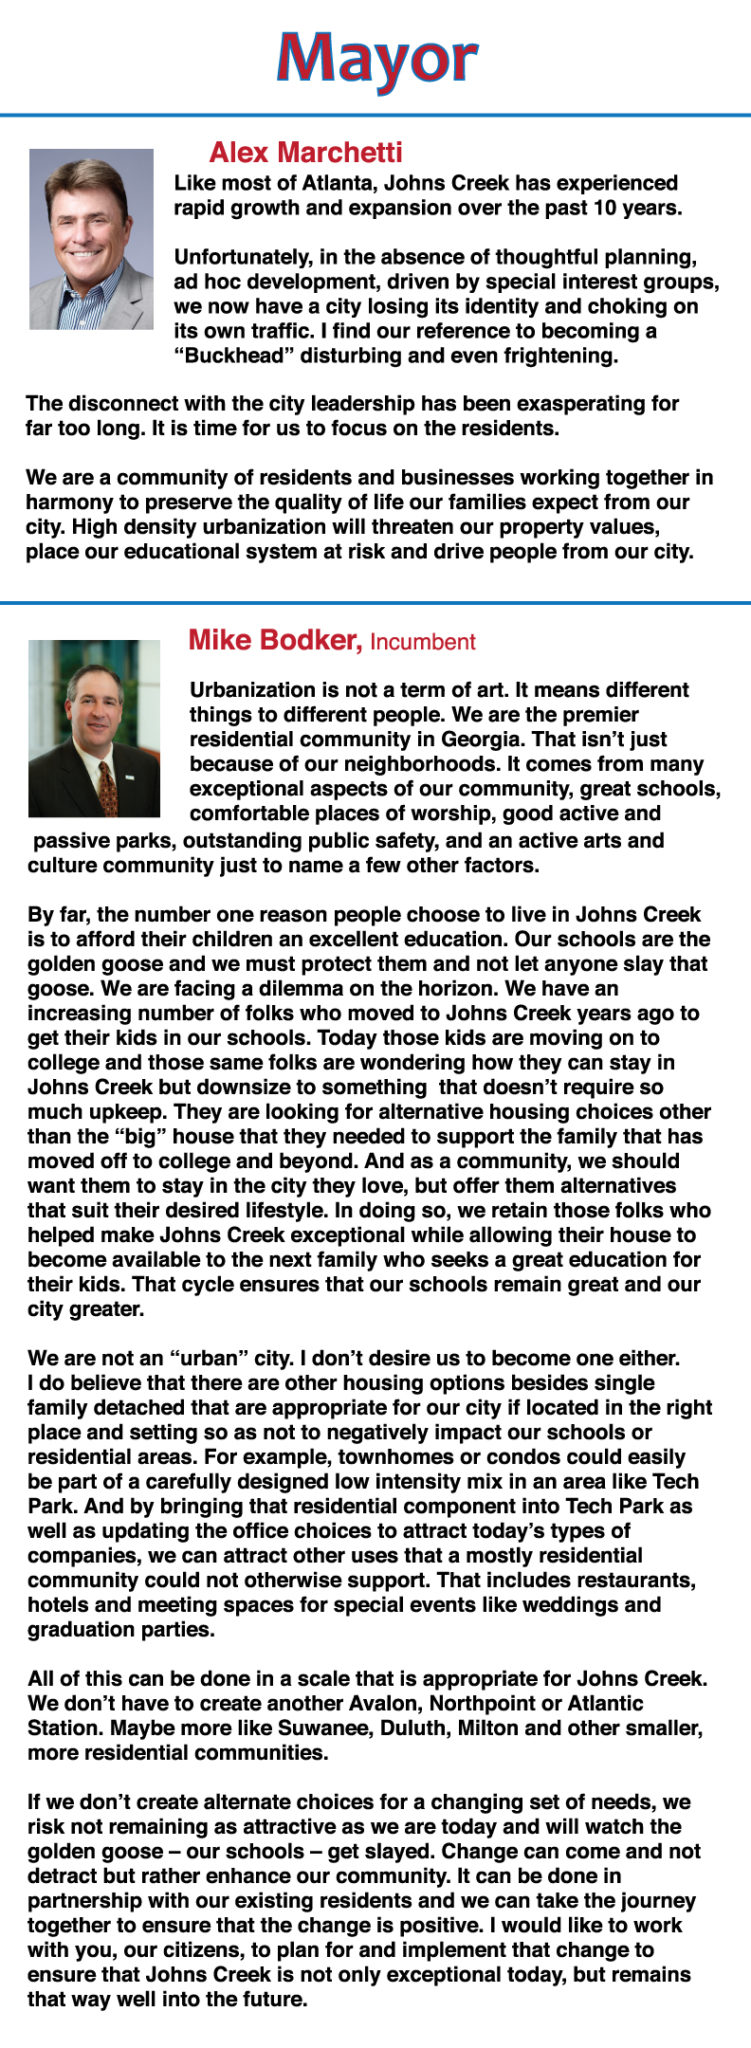 Ask the Mayor Candidates: Thoughts on urbanization in Johns Creek? 